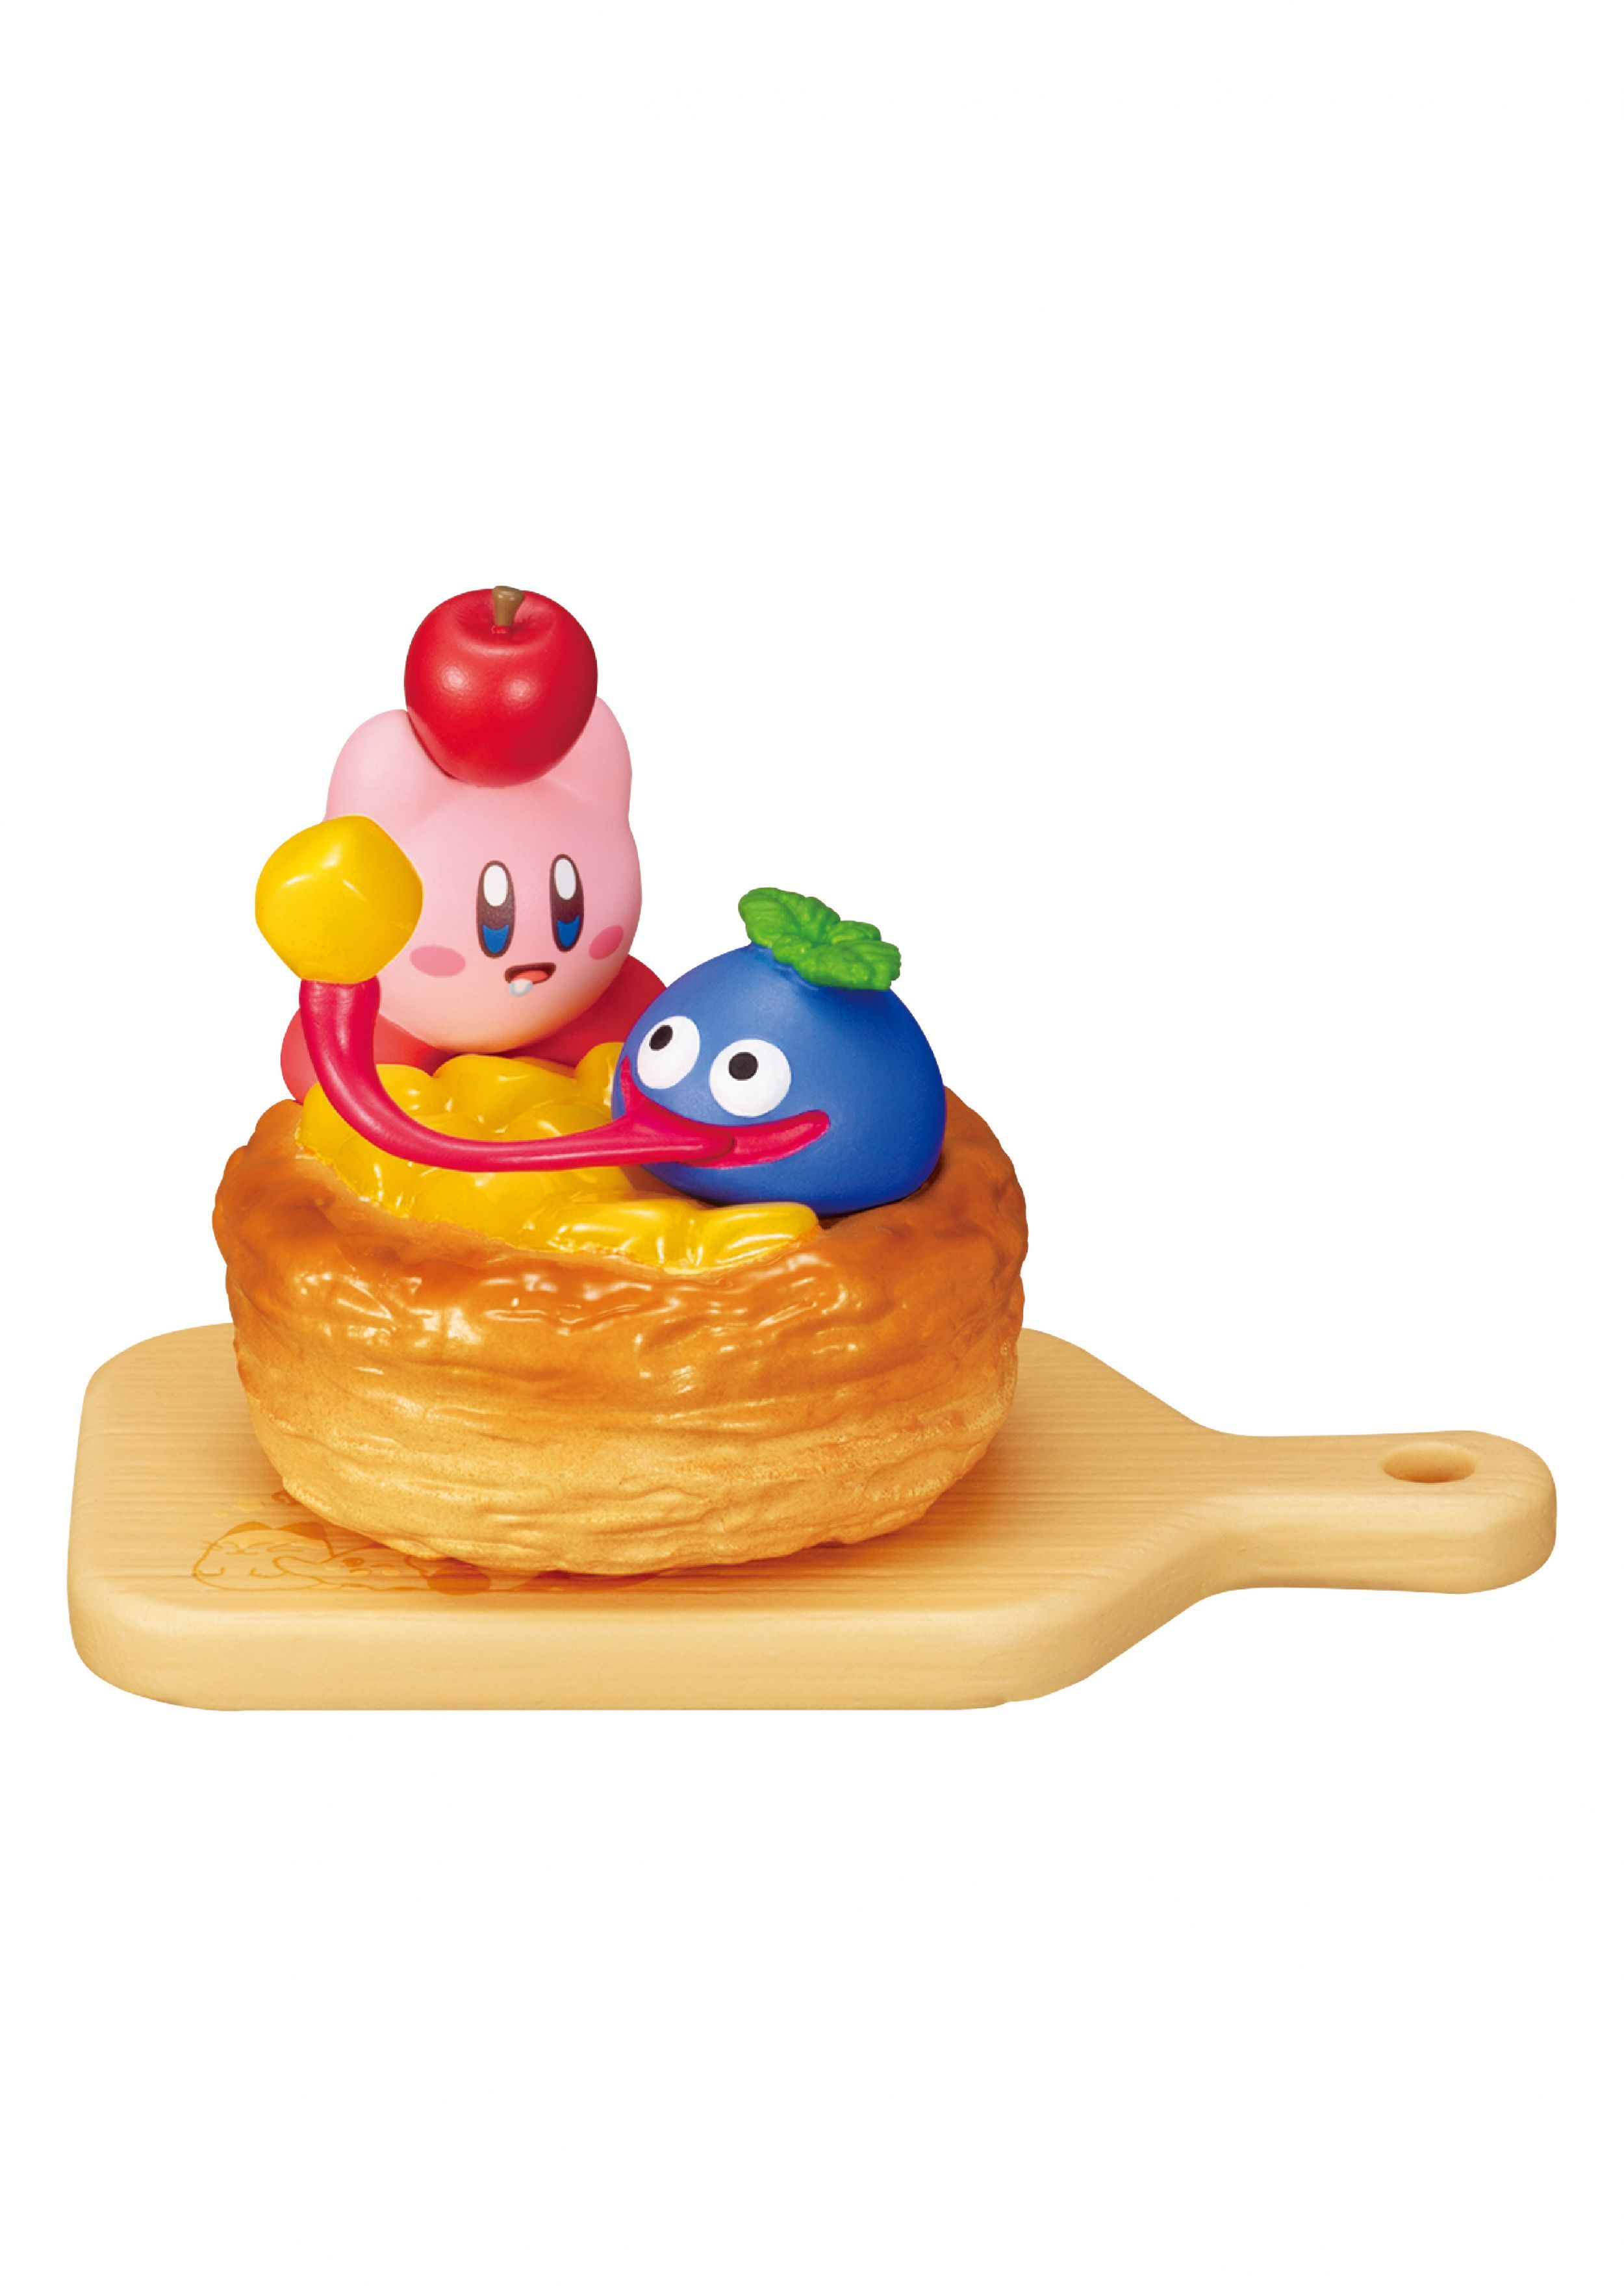 Kirby - Bakery Cafe Blind image count 6